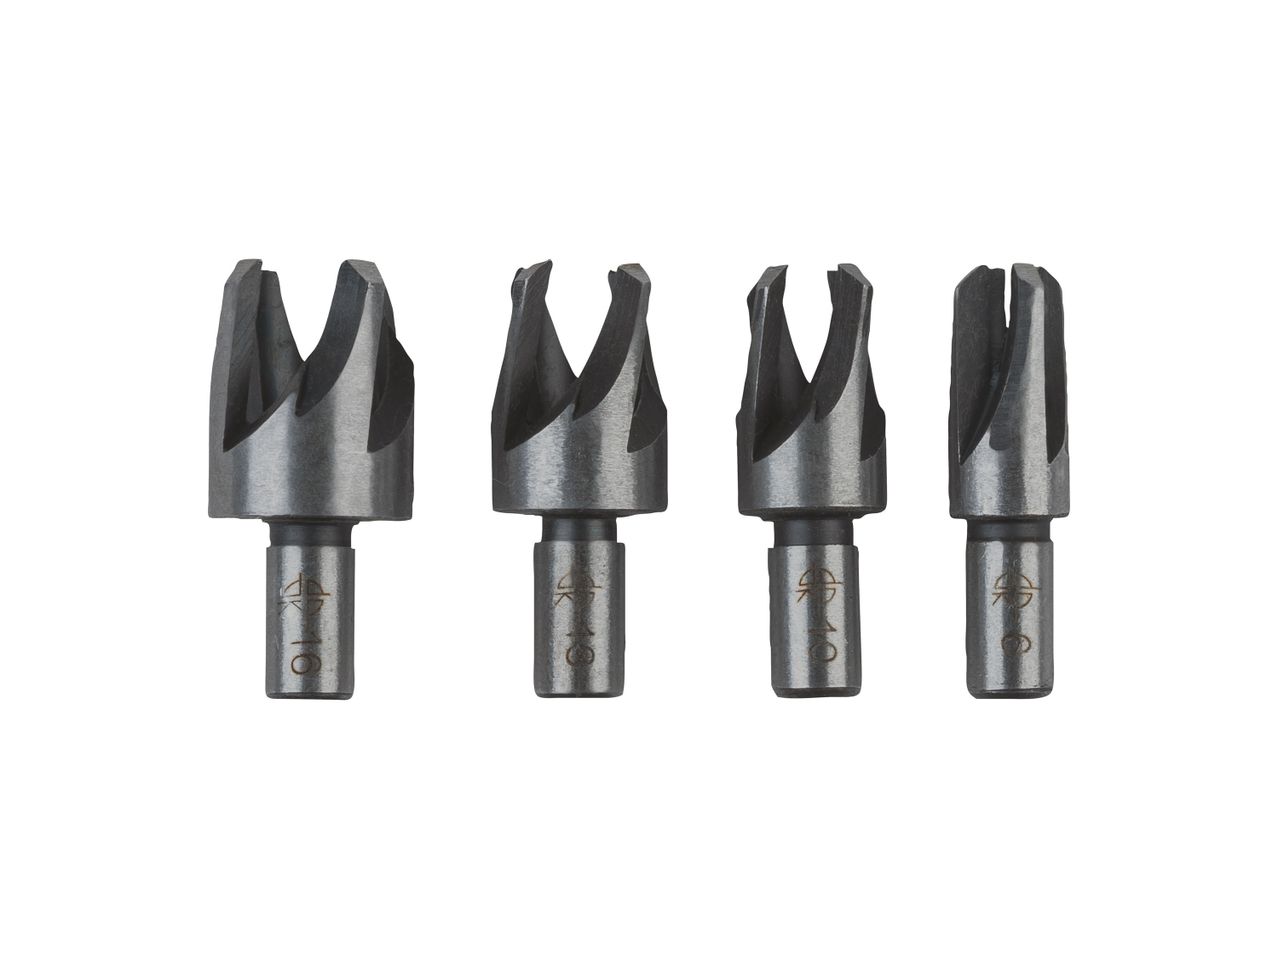 Go to full screen view: Drill Bit Set - Image 2